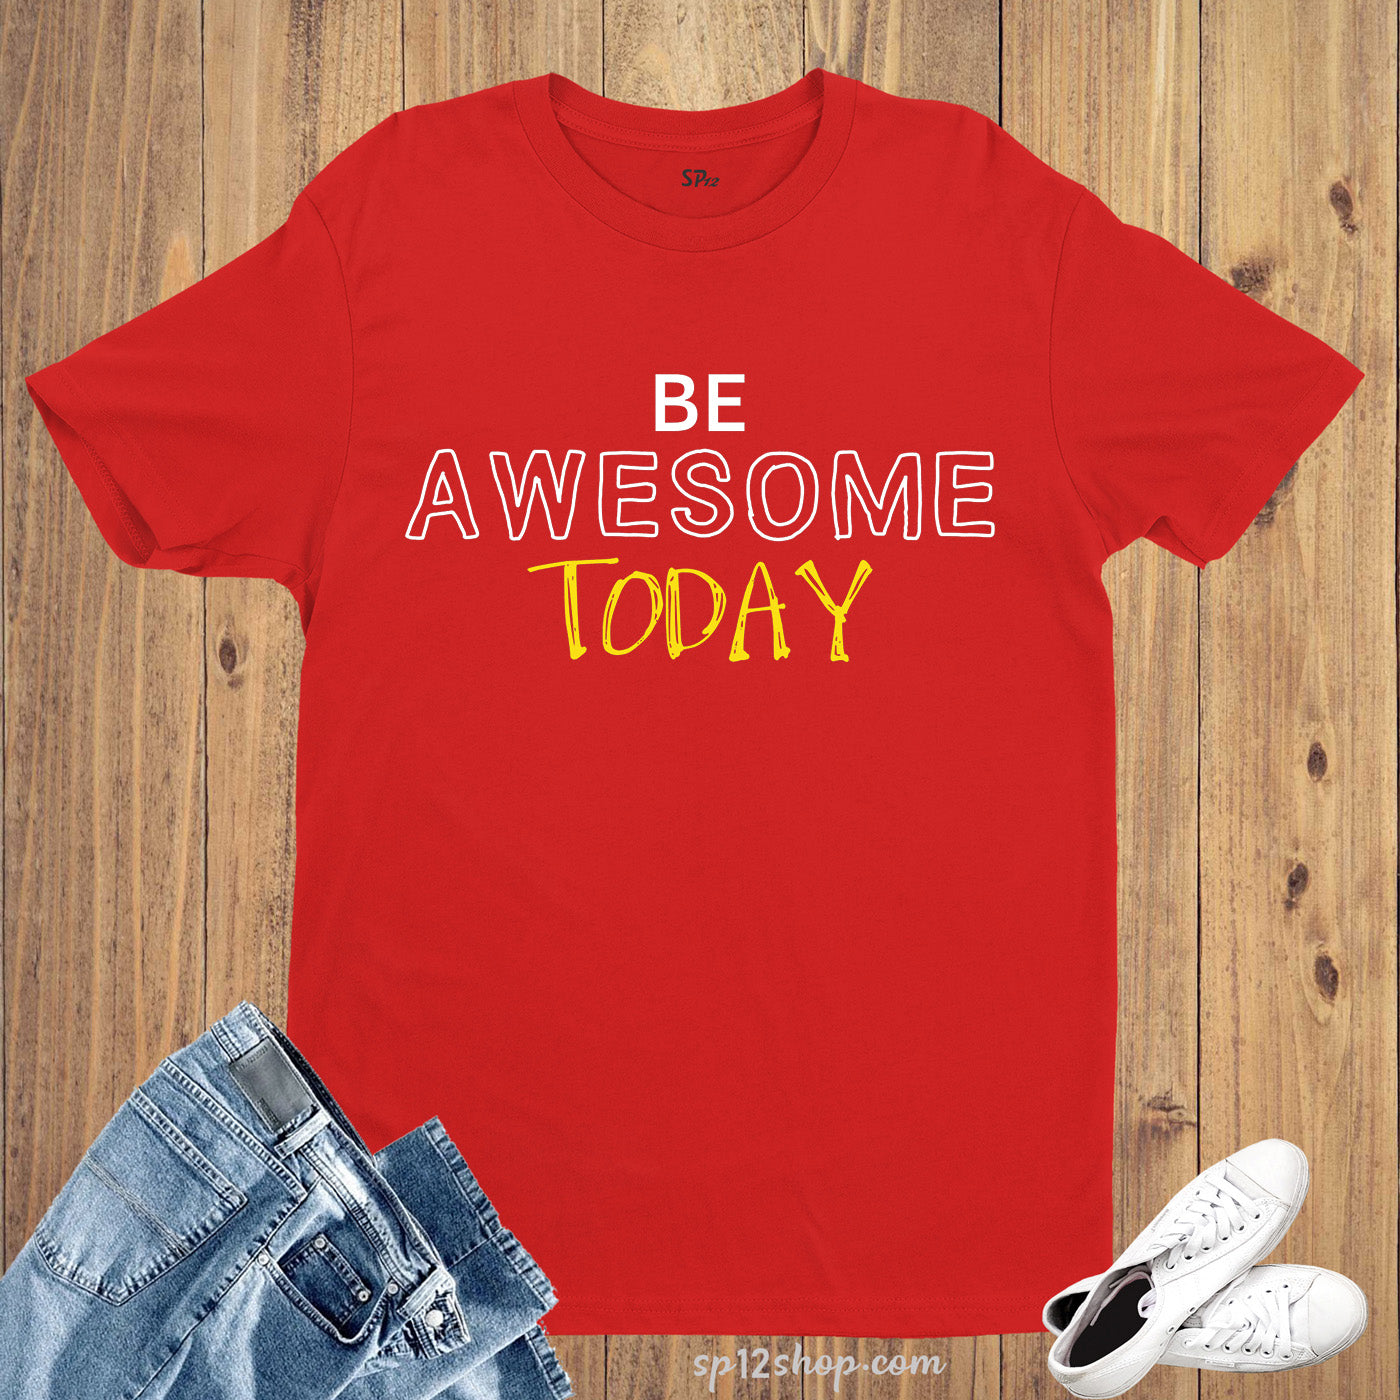 Be Awesome Today Lifestyle Motivation Slogan T Shirt